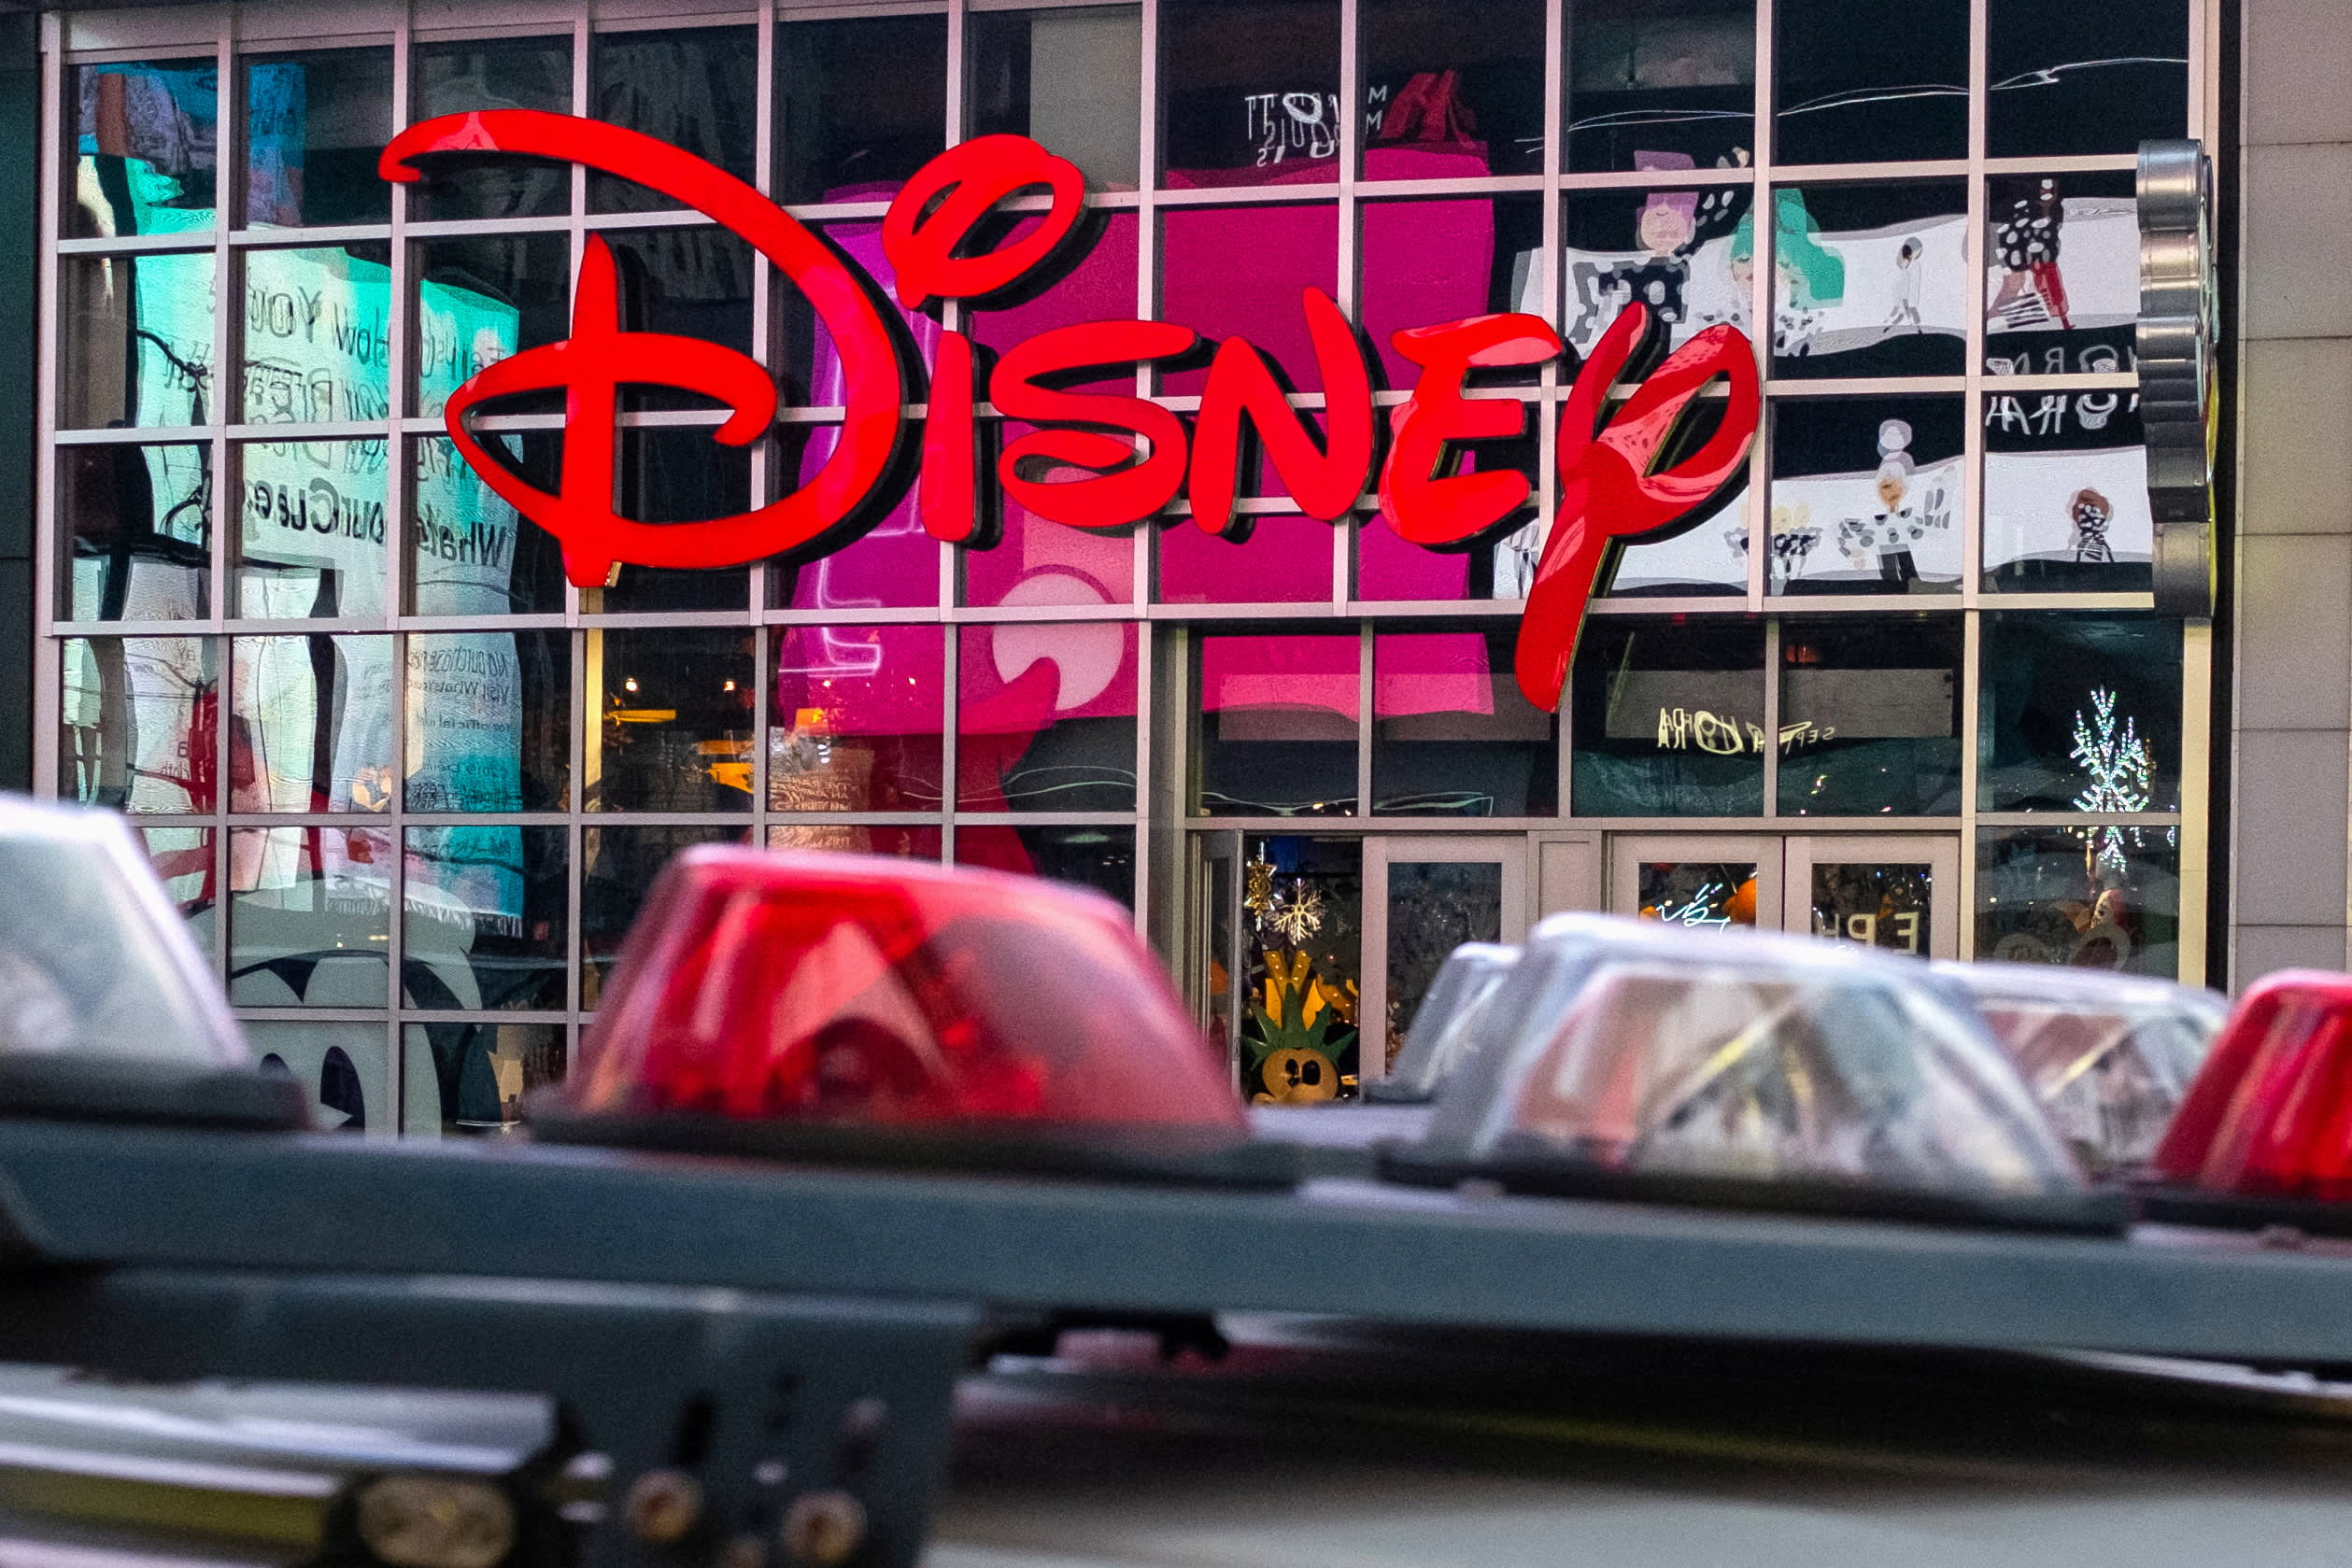 Sell Disney as falling Marvel popularity and lower TV ad revenue pressure stock, Atlantic Equities says